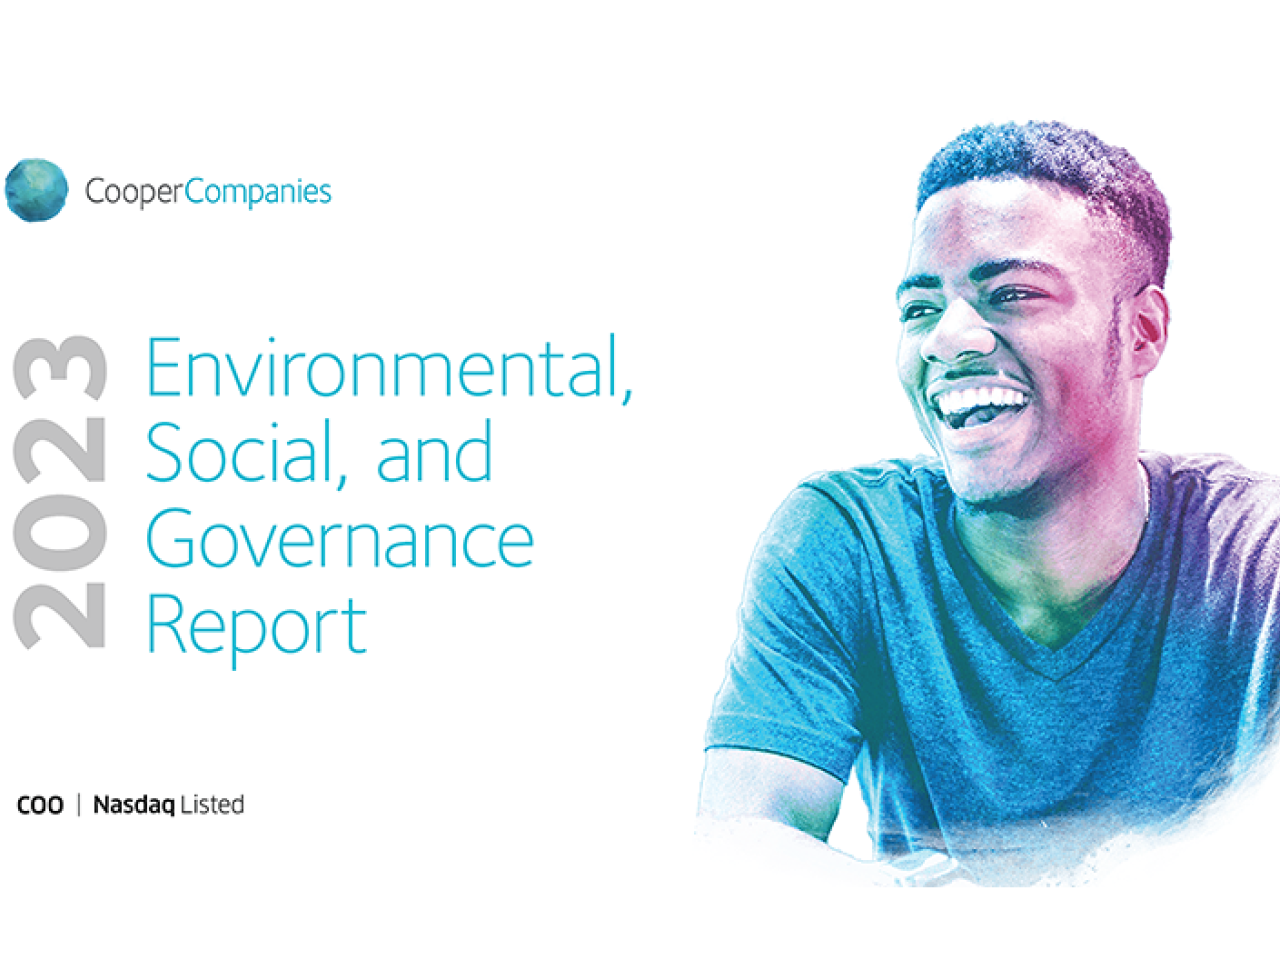 "2023 Environmental, Social, and Governance Report" with image of person smiling